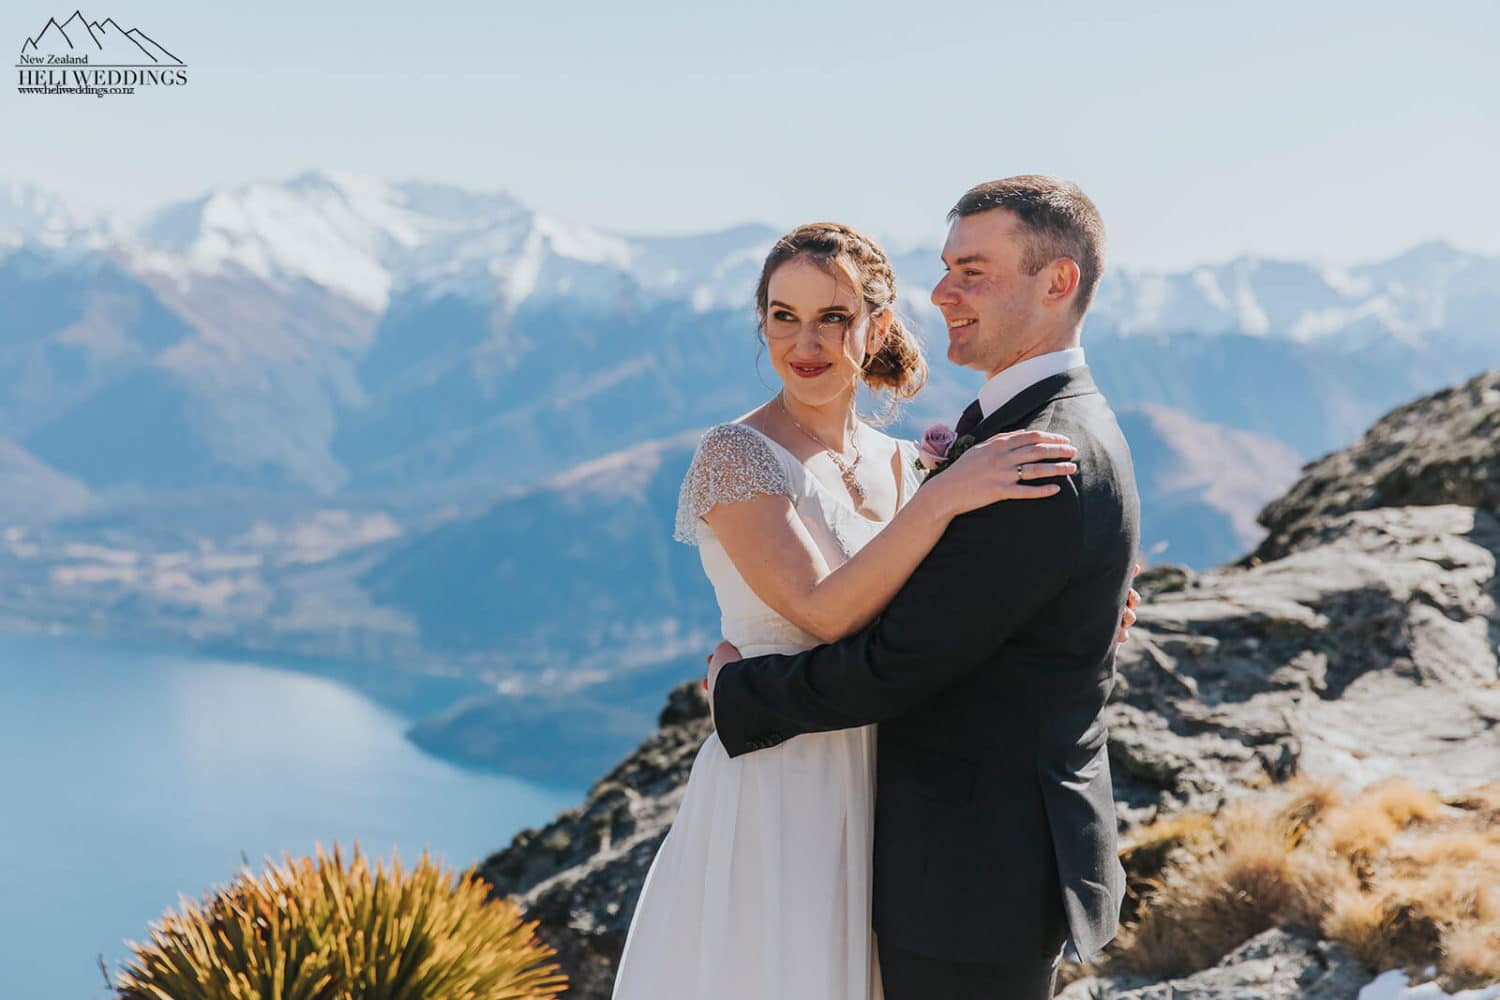 Heli wedding ceremony on The Ledge in Queenstown